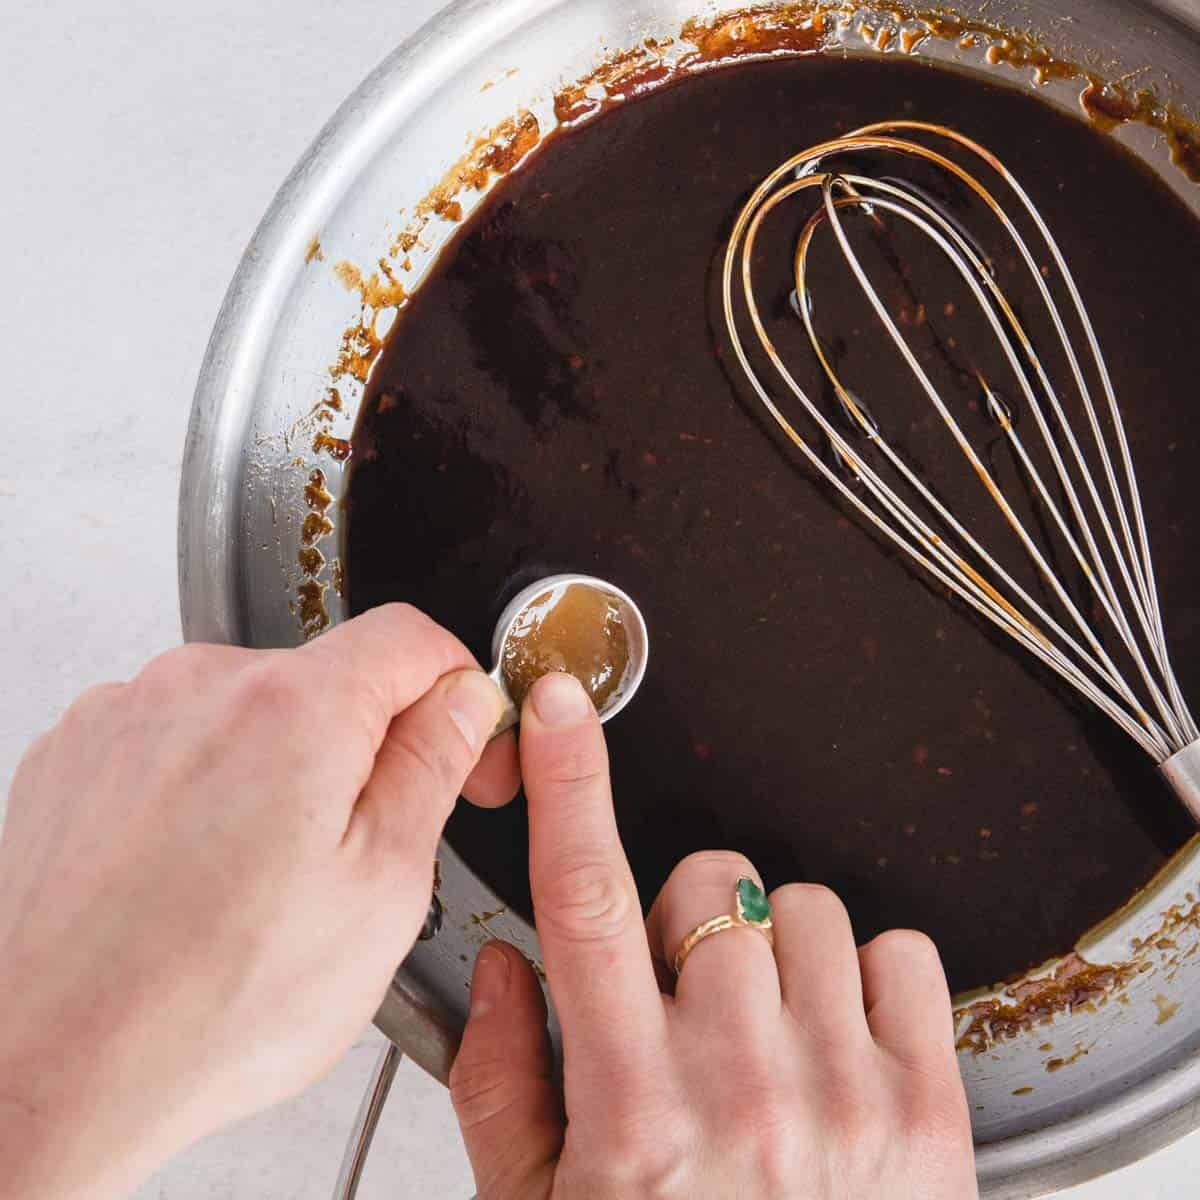 honey being added to a dark sauce in a pan